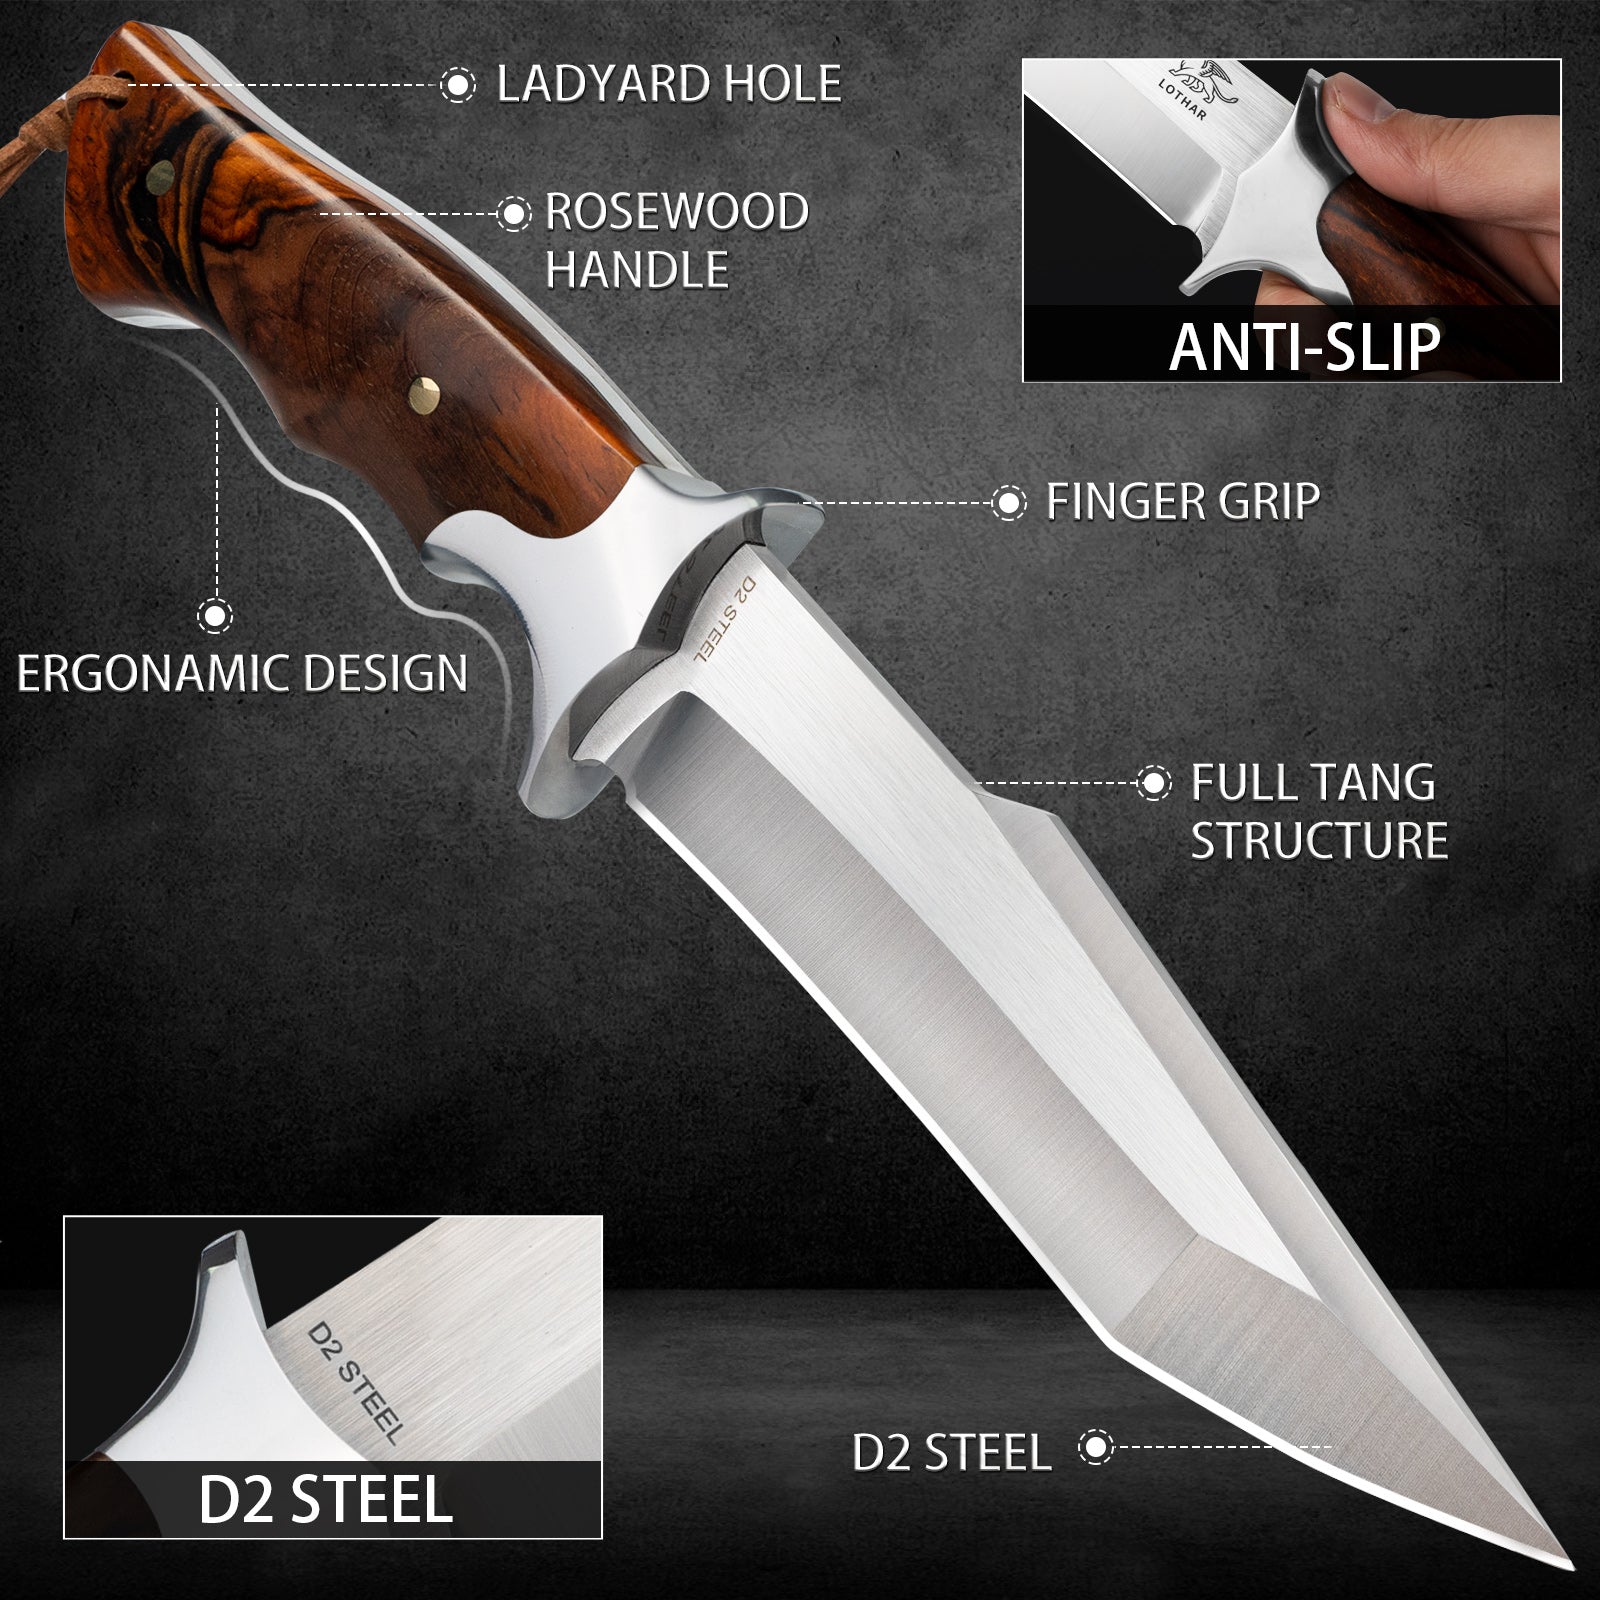 17 Stainless Steel Razor Sharp Bowie Blade Hunting Tactical Knife